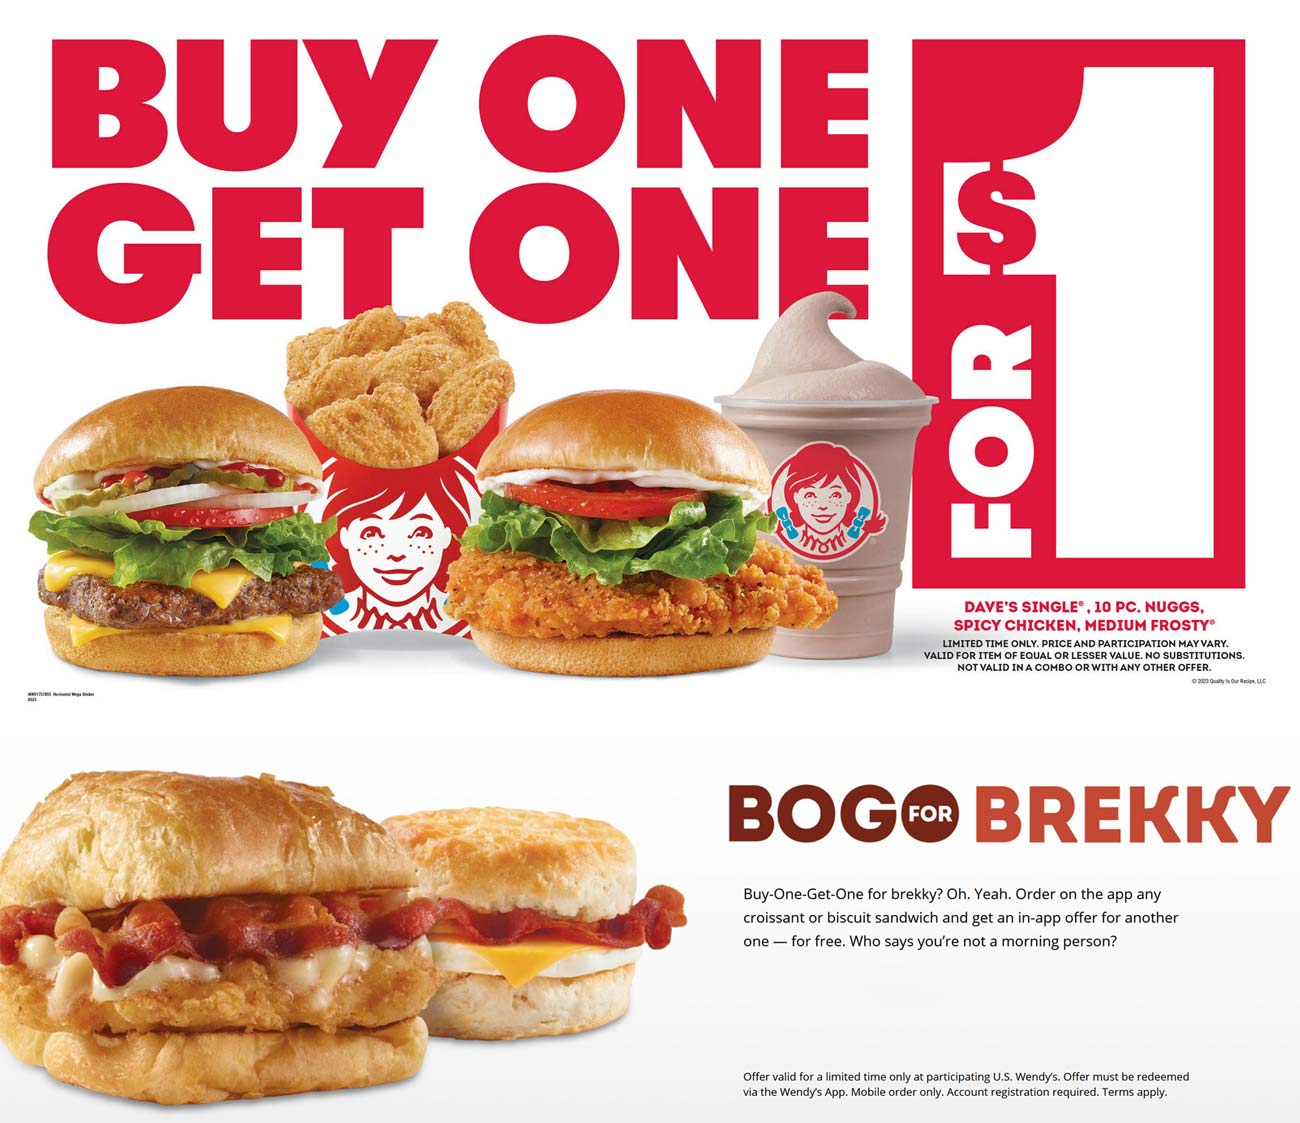 Wendys restaurants Coupon  Second cheeseburger, chicken or 10pc nuggets for $1 or free breakfast sandwich at Wendys #wendys 